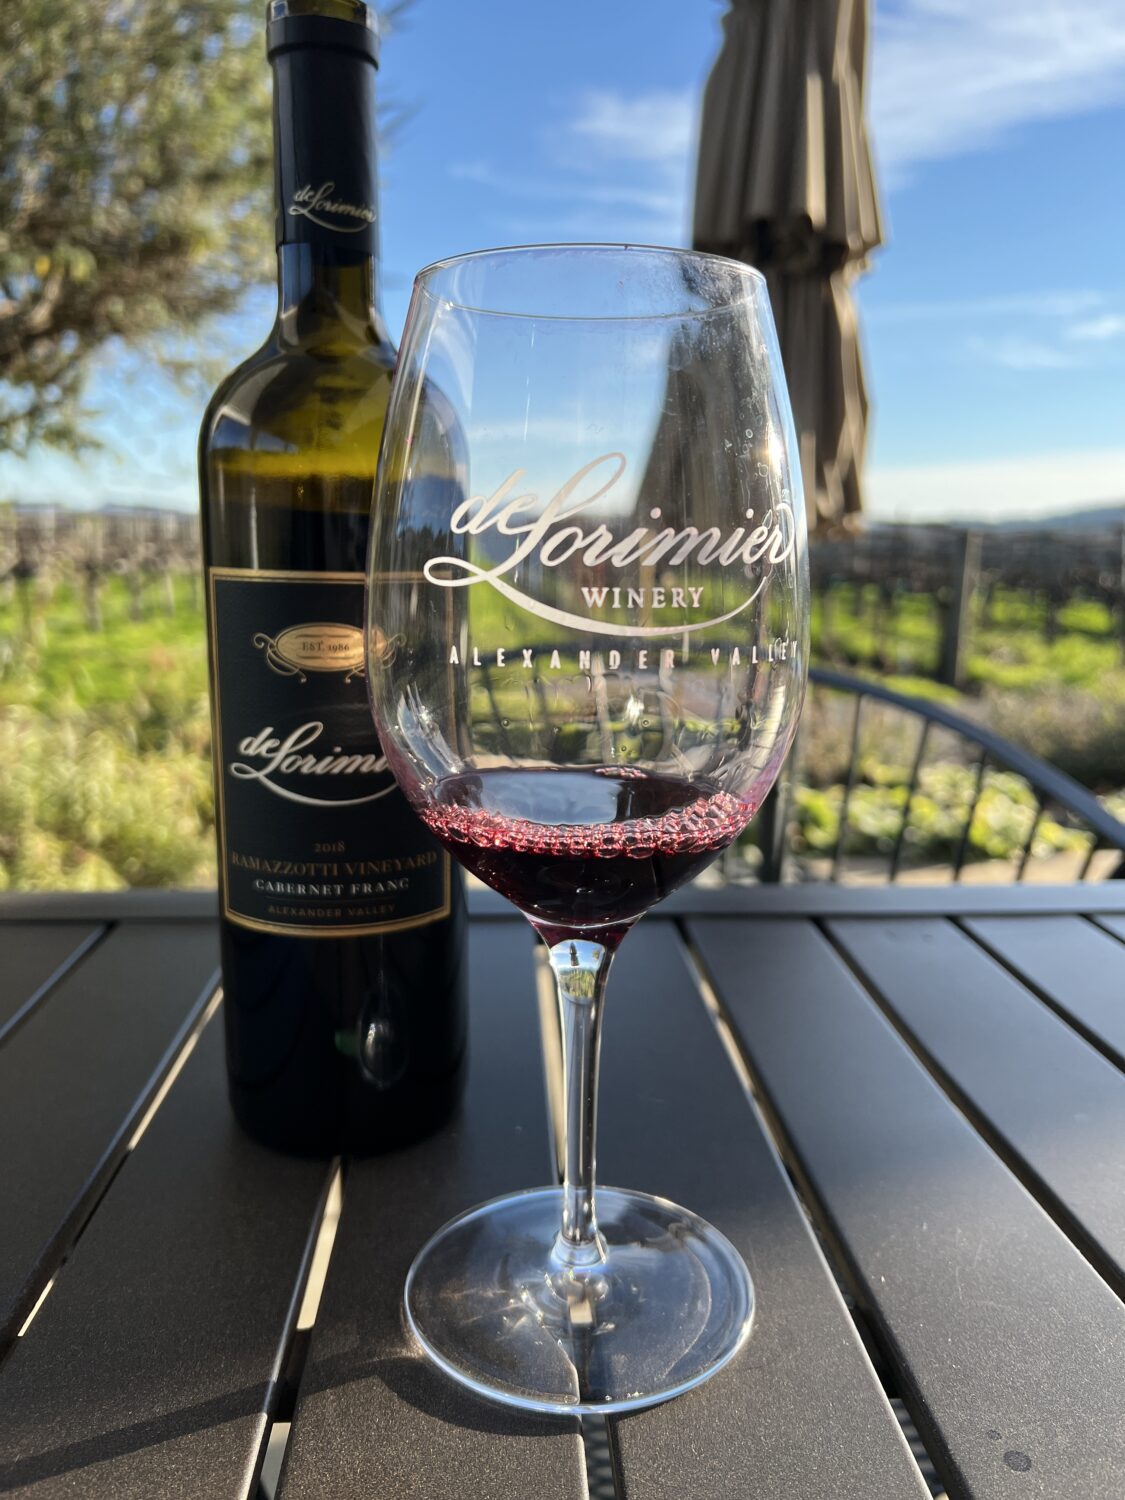 DeLormier Winery